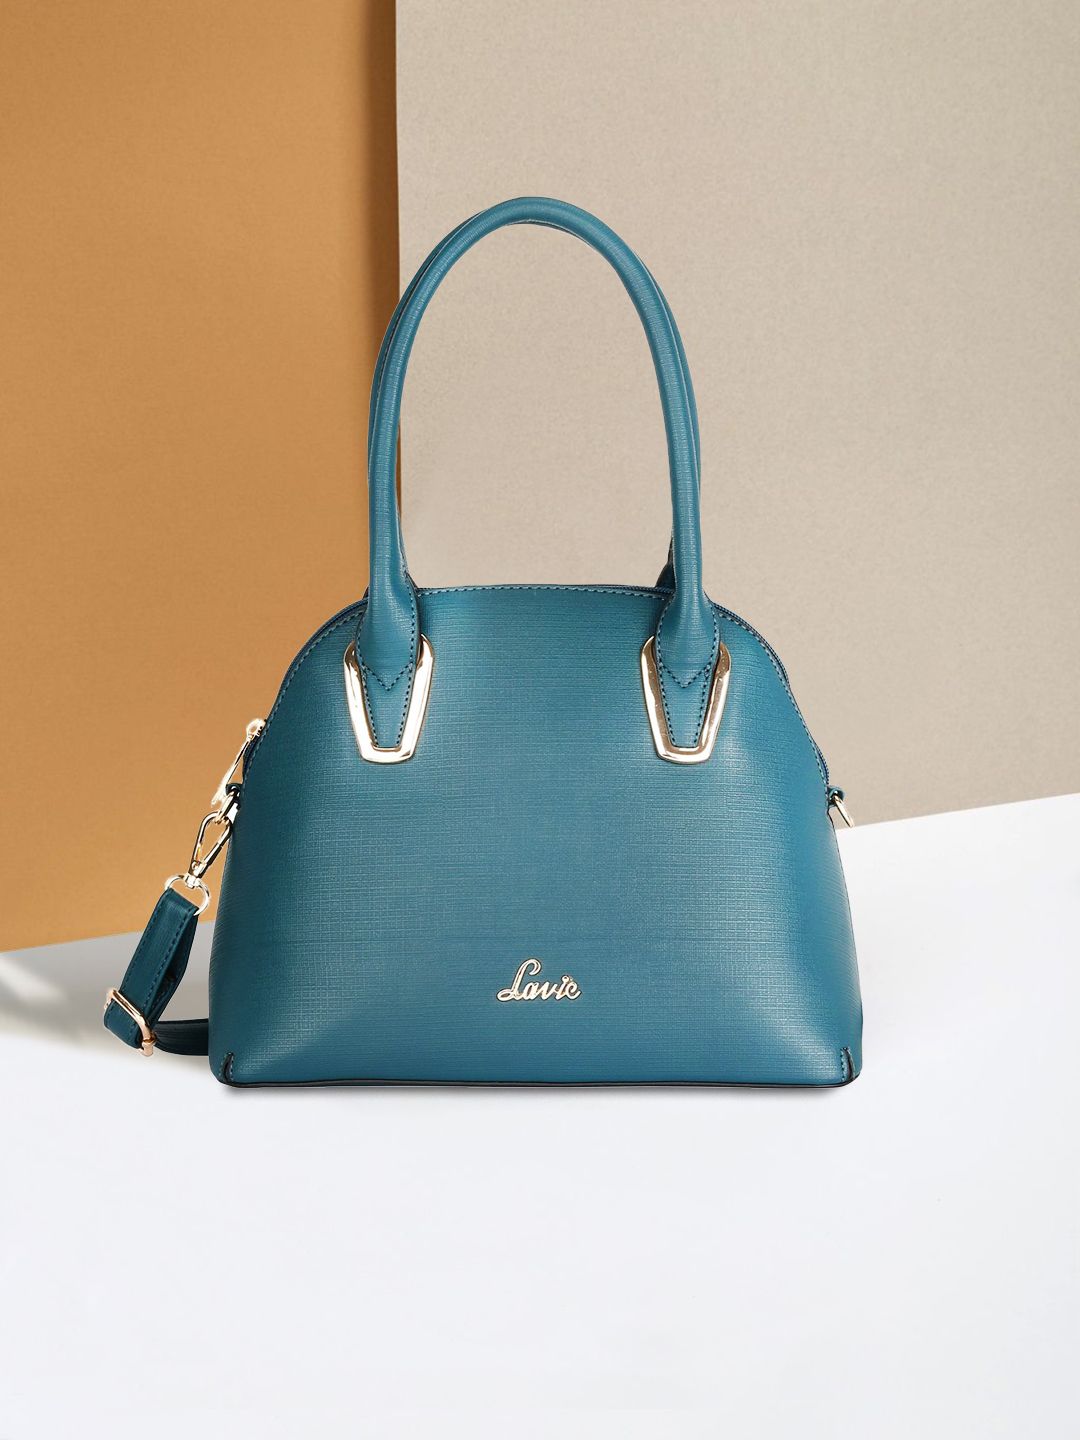 Lavie Teal PU Structured Handheld Bag Price in India